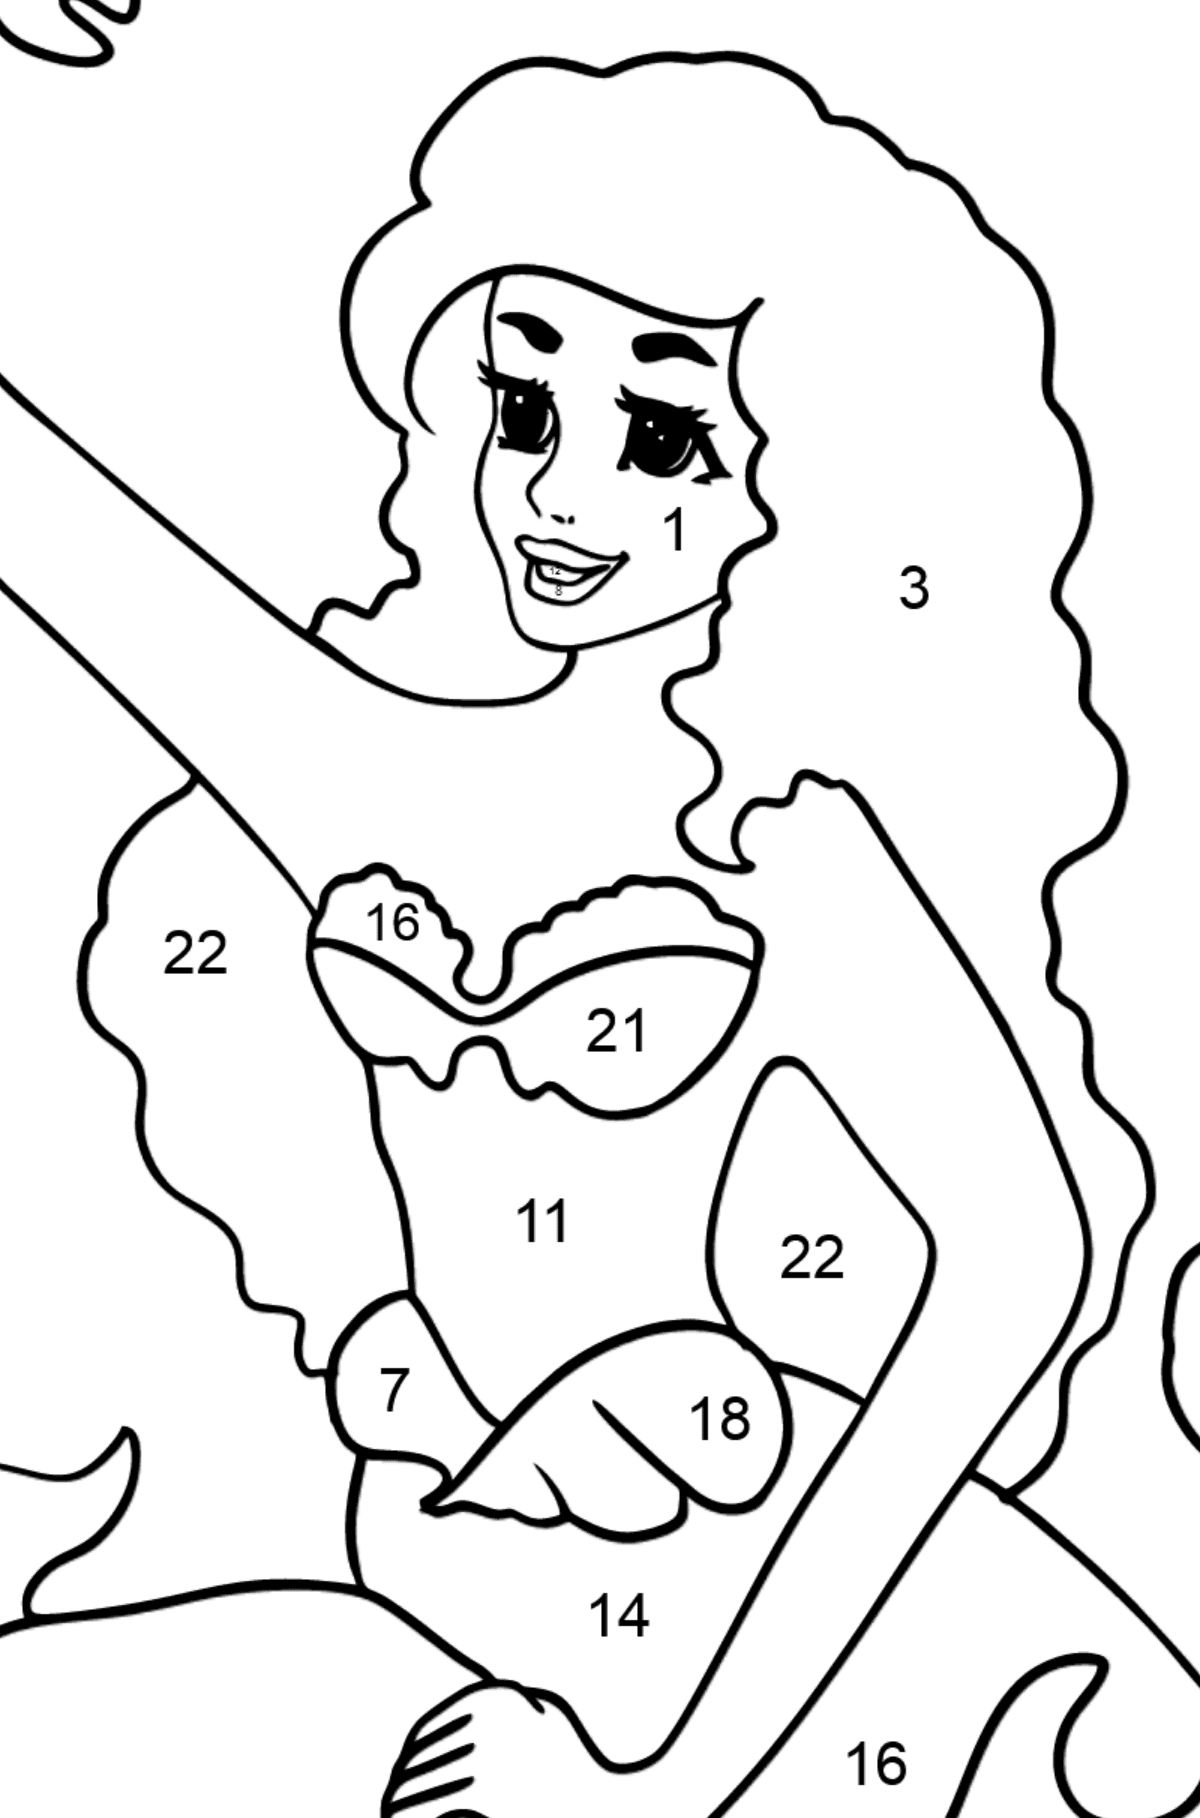 Coloring Page Mermaid and Crab - Coloring by Numbers for Kids